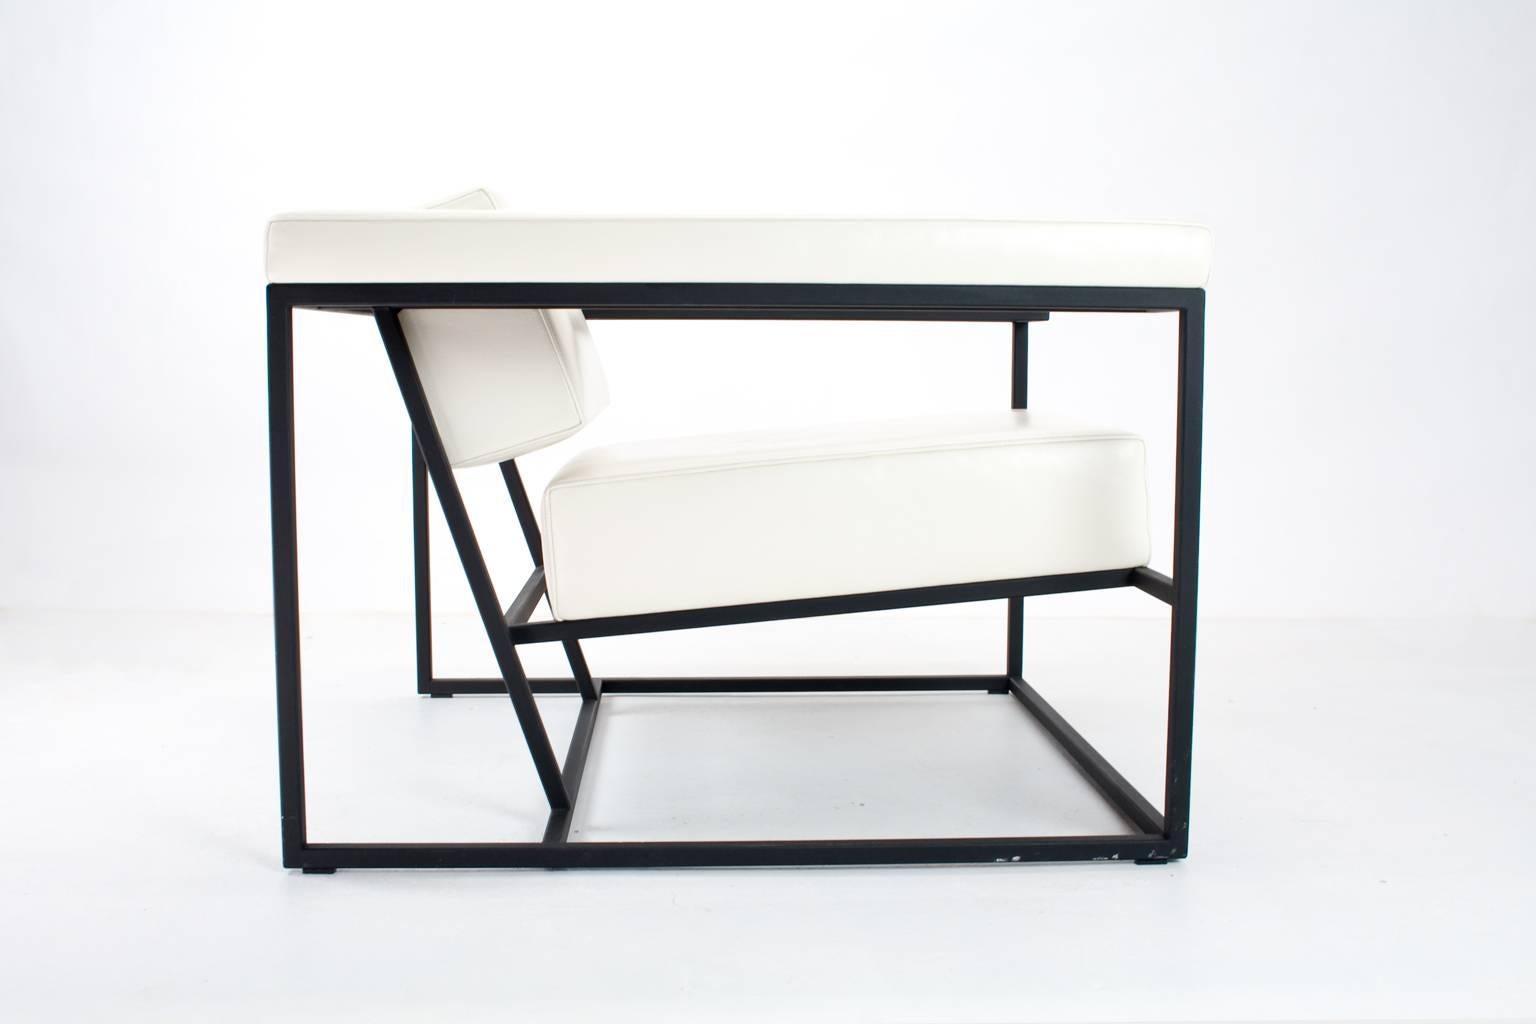 This contemporary Metropolis easy chair was designed in 2005 by Dutch Designer Roderick VOS for Spectrum. The black epoxied metal frame and white leather are in excellent condition. The geometrical and transparent design did not give in to comfort,